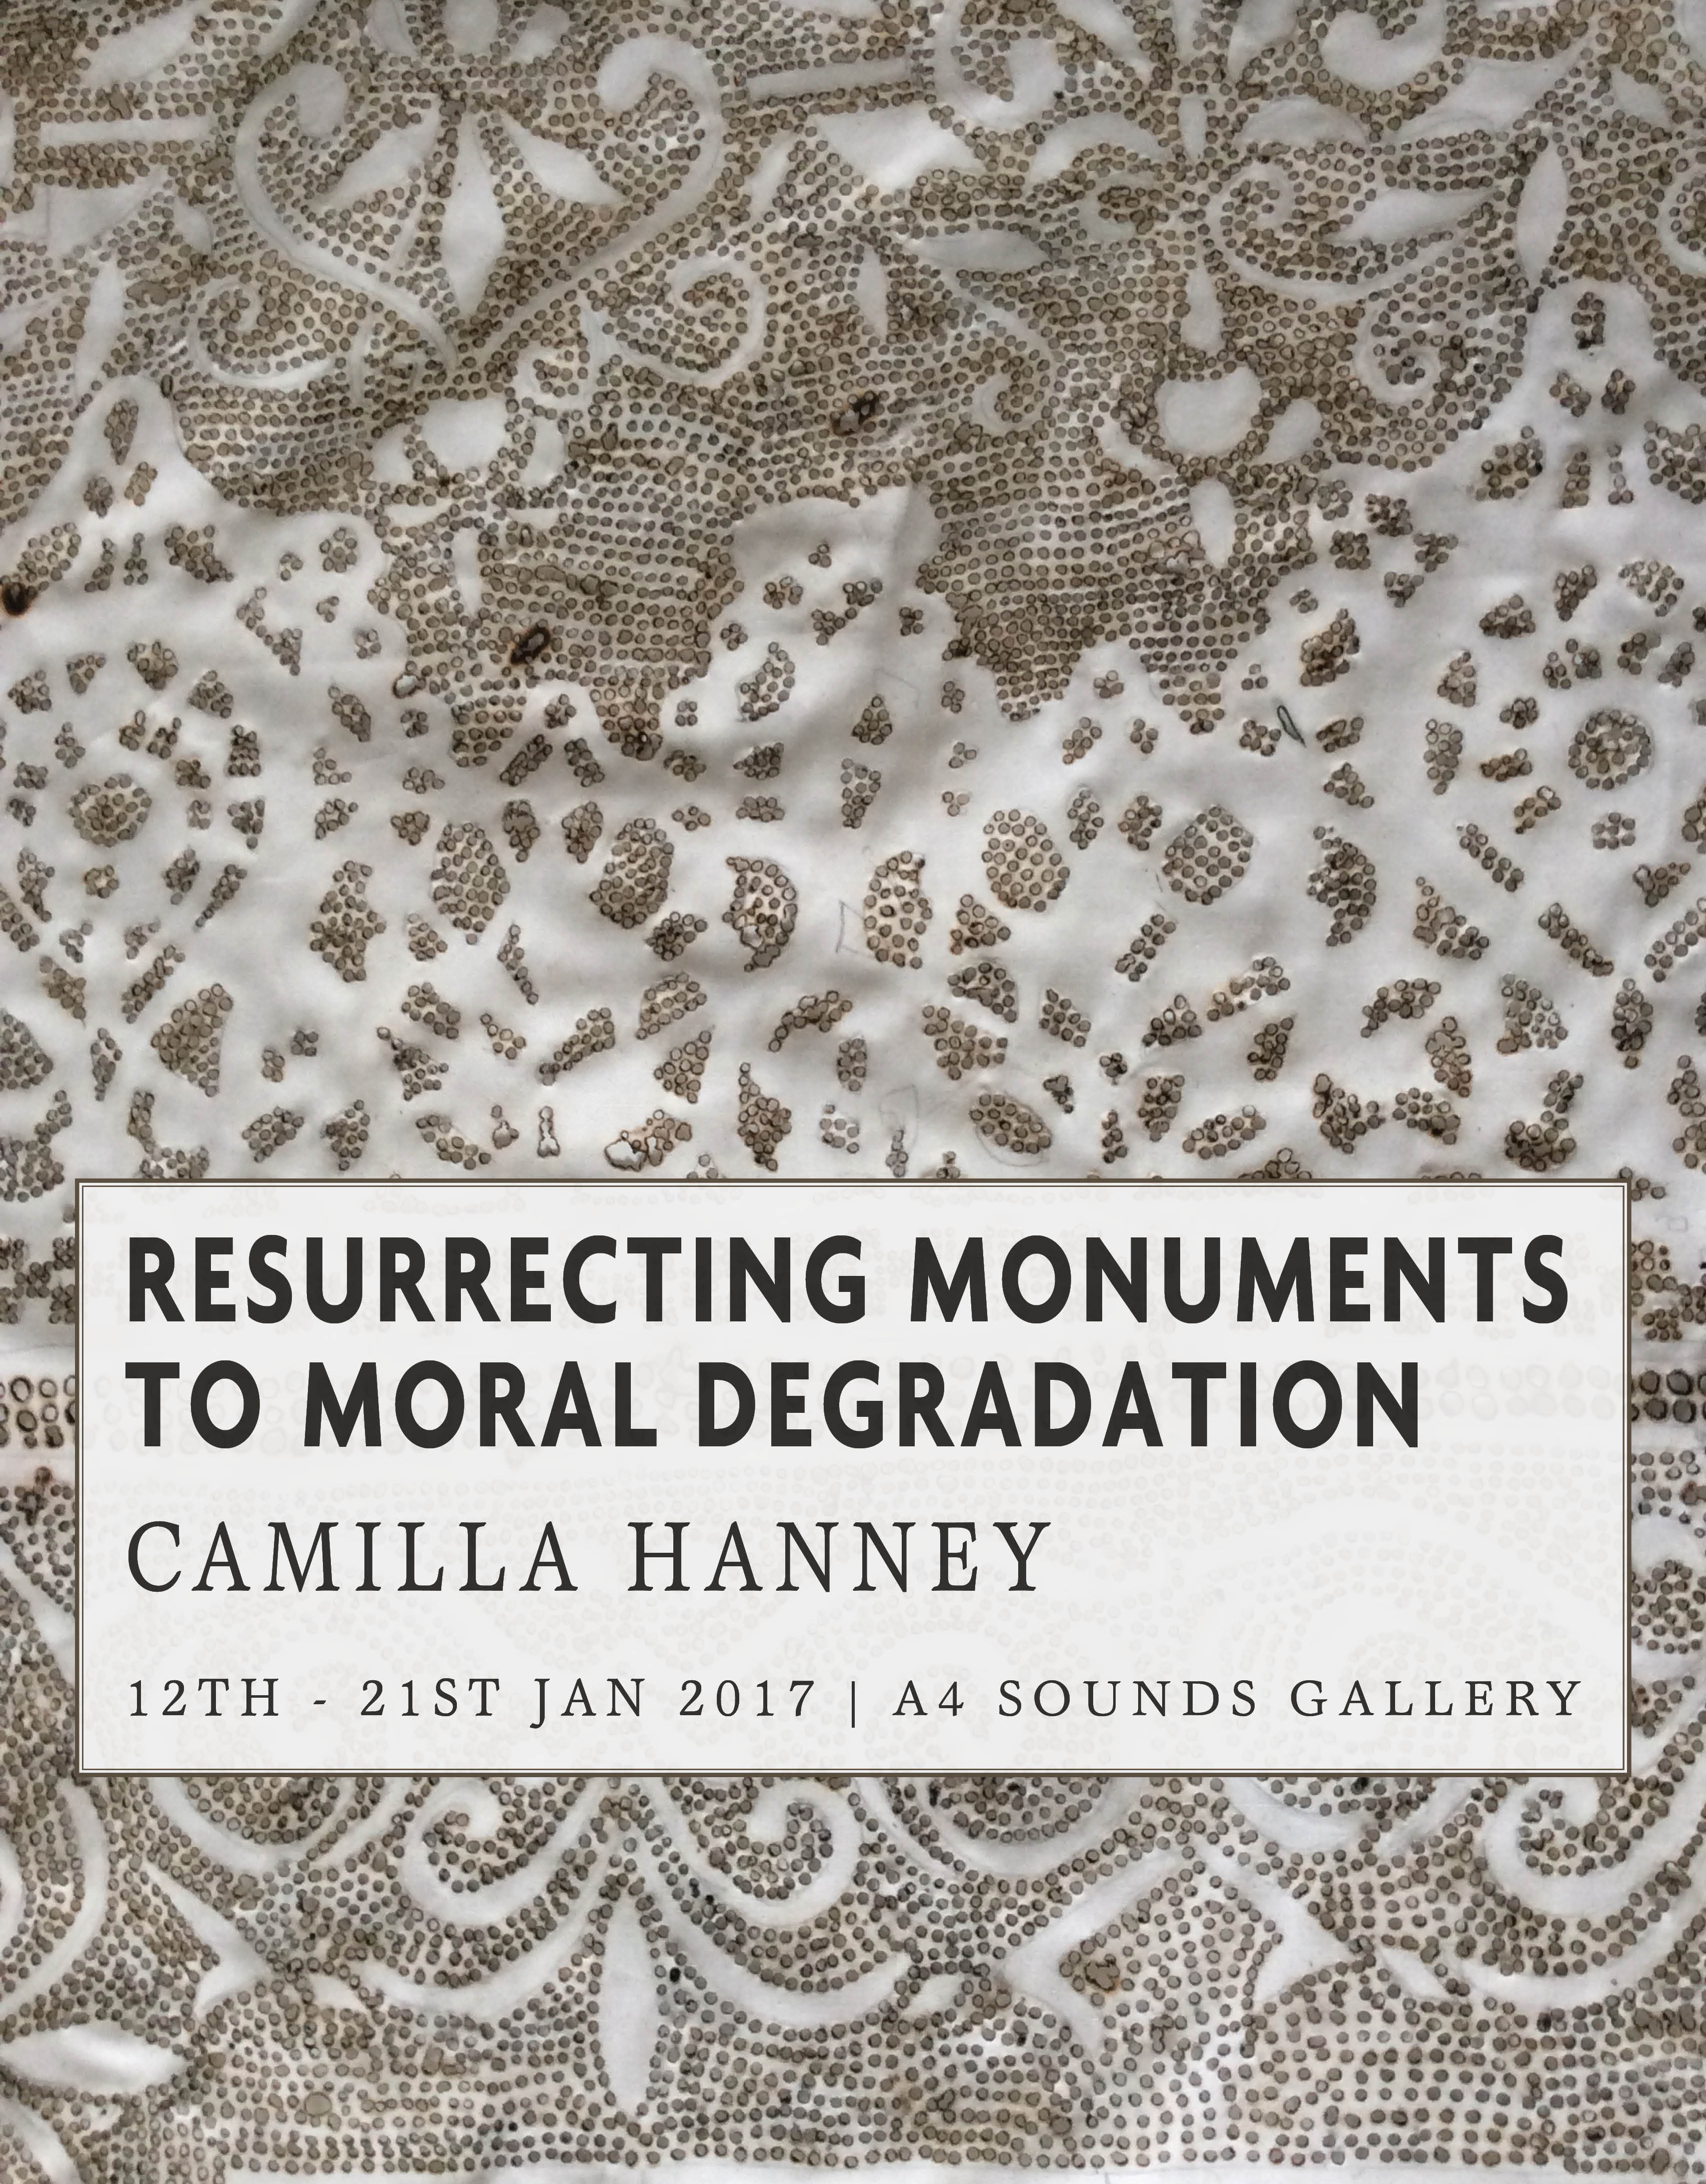 camilla-hanney-exhibition-poster-inside